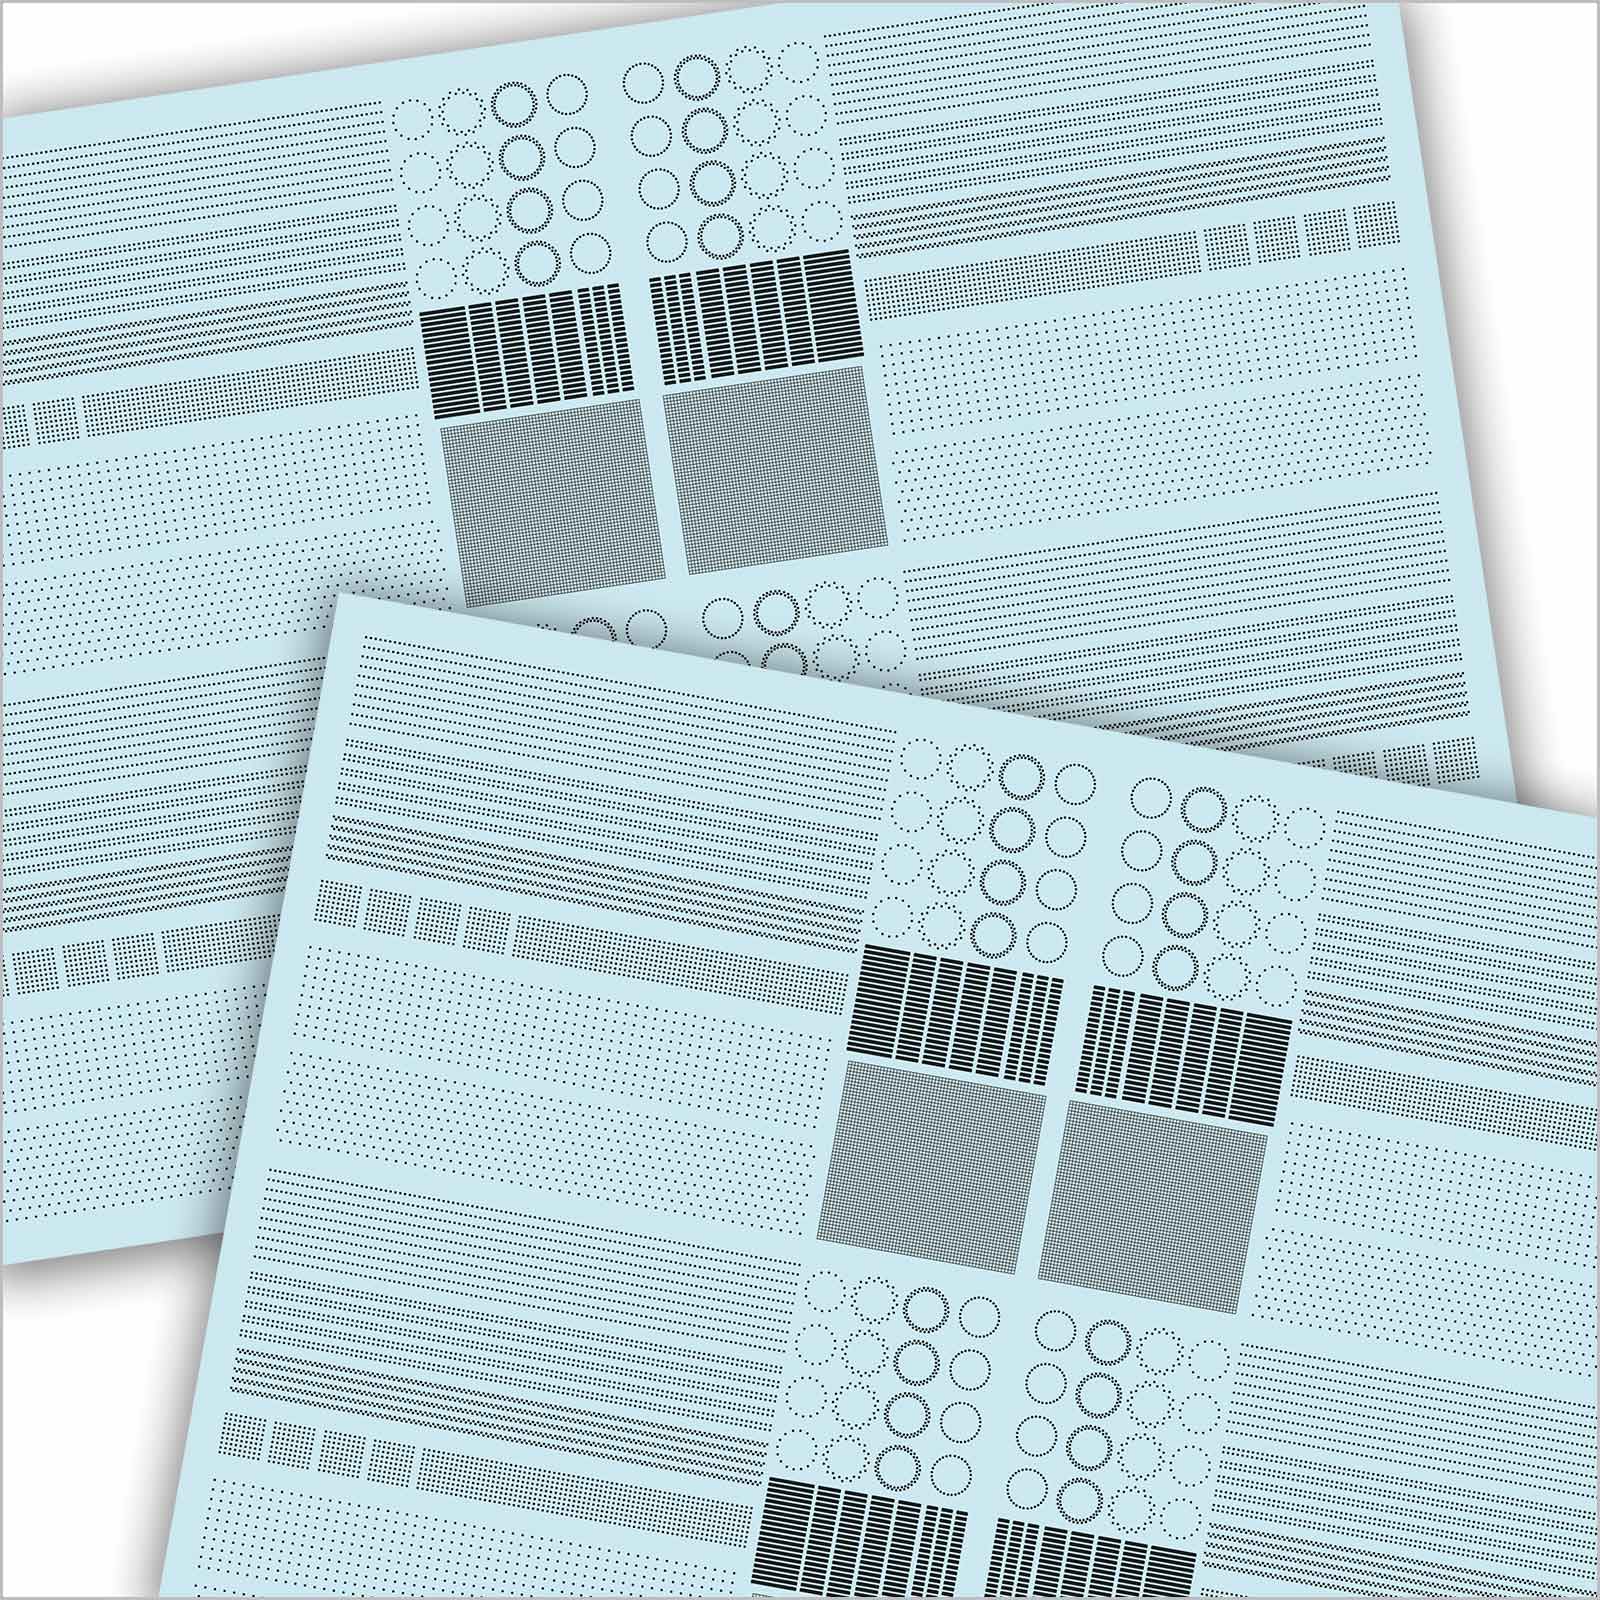 HO scale decals with raised 3D rivets and other surface details